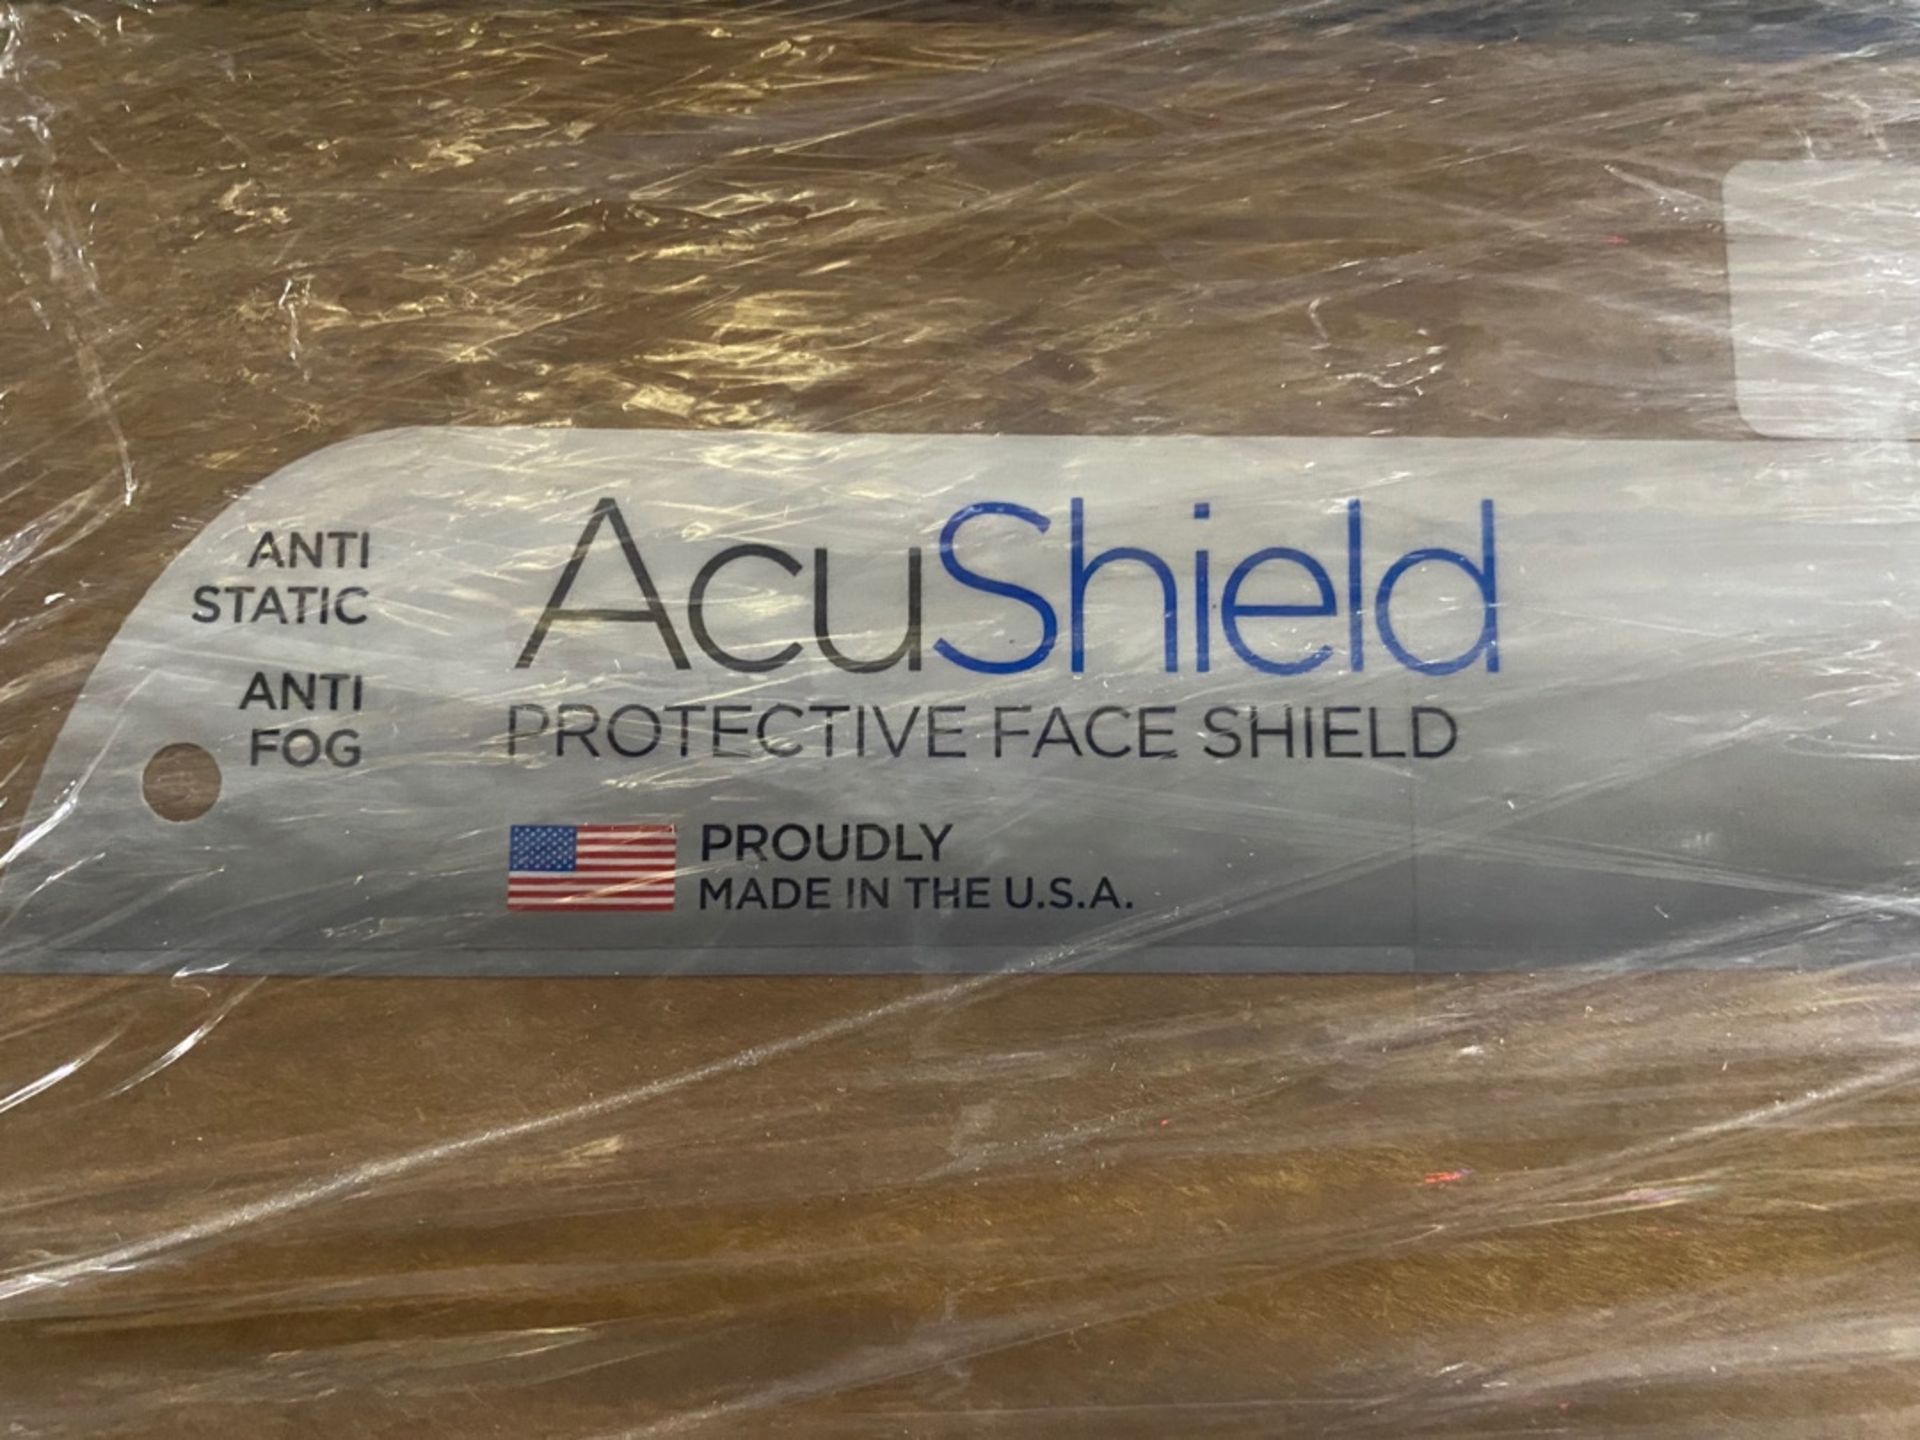 ACCURATE INDUSTRIAL 900102, ACUSHIELD FACE SHIELDS QTY:5400 UNITS - Image 2 of 2